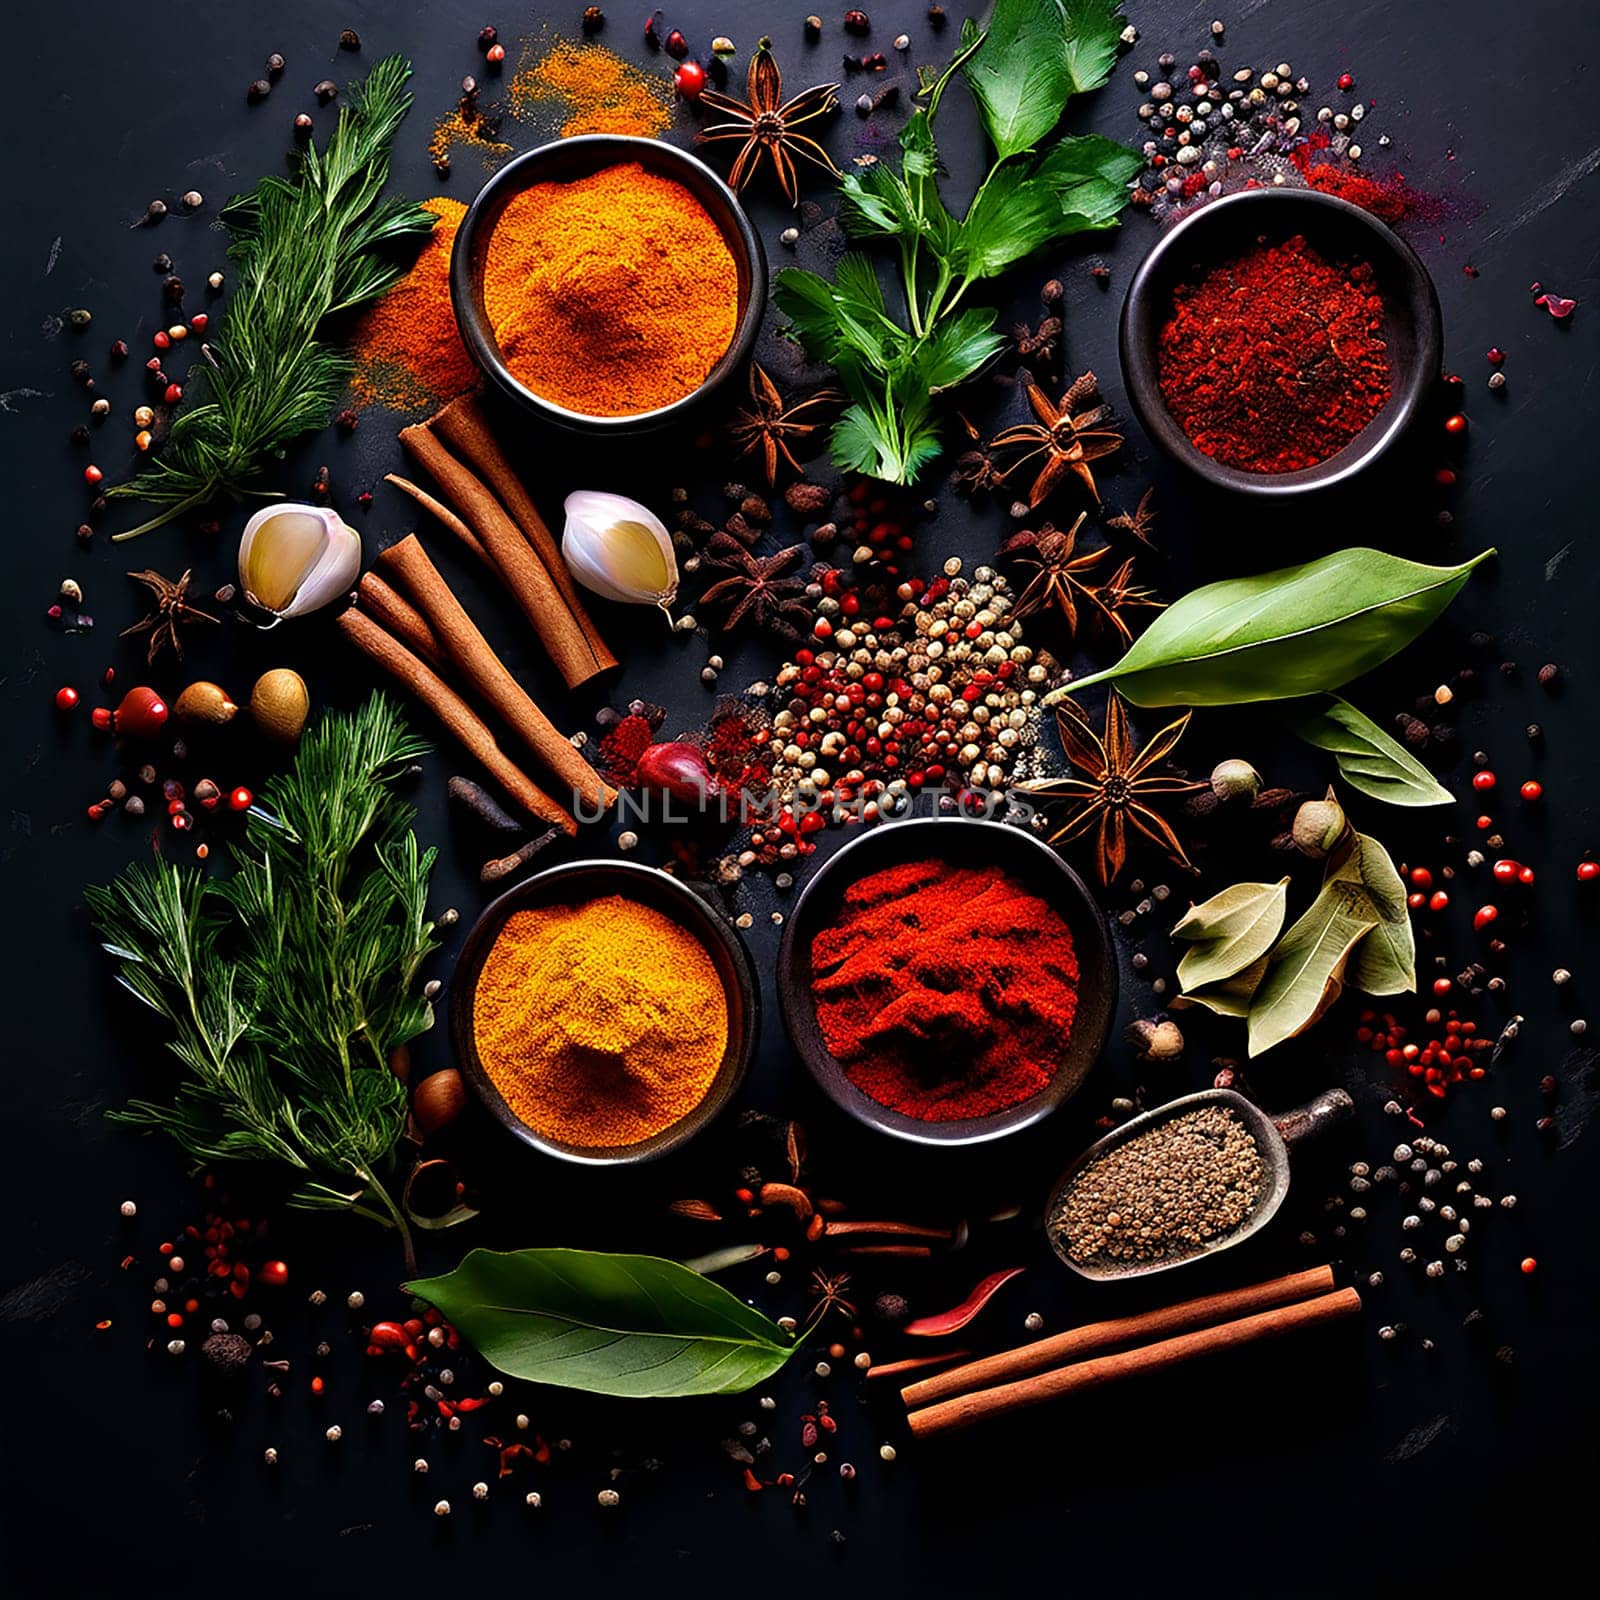 Aromatic Medley: Various Herbs and Spices for Cooking Inspiration